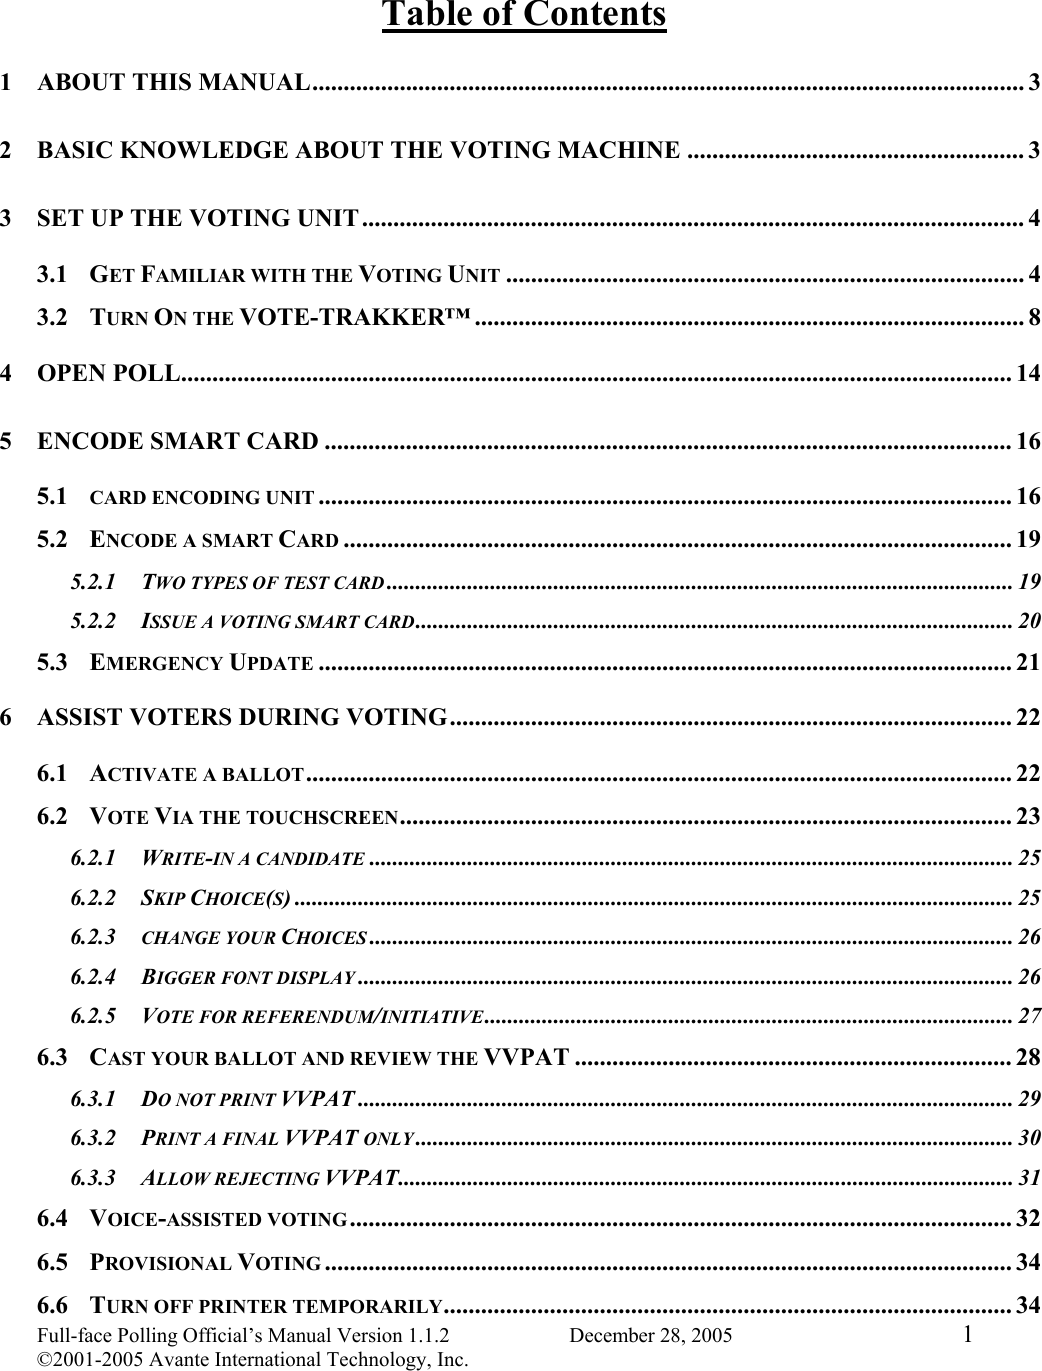 Full-face Polling Official’s Manual Version 1.1.2                       December 28, 2005  1 ©2001-2005 Avante International Technology, Inc.  Table of Contents 1 ABOUT THIS MANUAL.................................................................................................................. 3 2 BASIC KNOWLEDGE ABOUT THE VOTING MACHINE ...................................................... 3 3 SET UP THE VOTING UNIT..........................................................................................................4 3.1 GET FAMILIAR WITH THE VOTING UNIT ................................................................................... 4 3.2 TURN ON THE VOTE-TRAKKER™ ........................................................................................ 8 4 OPEN POLL..................................................................................................................................... 14 5 ENCODE SMART CARD .............................................................................................................. 16 5.1 CARD ENCODING UNIT ............................................................................................................... 16 5.2 ENCODE A SMART CARD ........................................................................................................... 19 5.2.1 TWO TYPES OF TEST CARD ............................................................................................................. 19 5.2.2 ISSUE A VOTING SMART CARD........................................................................................................ 20 5.3 EMERGENCY UPDATE ............................................................................................................... 21 6 ASSIST VOTERS DURING VOTING.......................................................................................... 22 6.1 ACTIVATE A BALLOT................................................................................................................. 22 6.2 VOTE VIA THE TOUCHSCREEN.................................................................................................. 23 6.2.1 WRITE-IN A CANDIDATE ................................................................................................................ 25 6.2.2 SKIP CHOICE(S) ............................................................................................................................. 25 6.2.3 CHANGE YOUR CHOICES ................................................................................................................ 26 6.2.4 BIGGER FONT DISPLAY .................................................................................................................. 26 6.2.5 VOTE FOR REFERENDUM/INITIATIVE............................................................................................ 27 6.3 CAST YOUR BALLOT AND REVIEW THE VVPAT ...................................................................... 28 6.3.1 DO NOT PRINT VVPAT .................................................................................................................. 29 6.3.2 PRINT A FINAL VVPAT ONLY ........................................................................................................ 30 6.3.3 ALLOW REJECTING VVPAT........................................................................................................... 31 6.4 VOICE-ASSISTED VOTING .......................................................................................................... 32 6.5 PROVISIONAL VOTING .............................................................................................................. 34 6.6 TURN OFF PRINTER TEMPORARILY........................................................................................... 34 